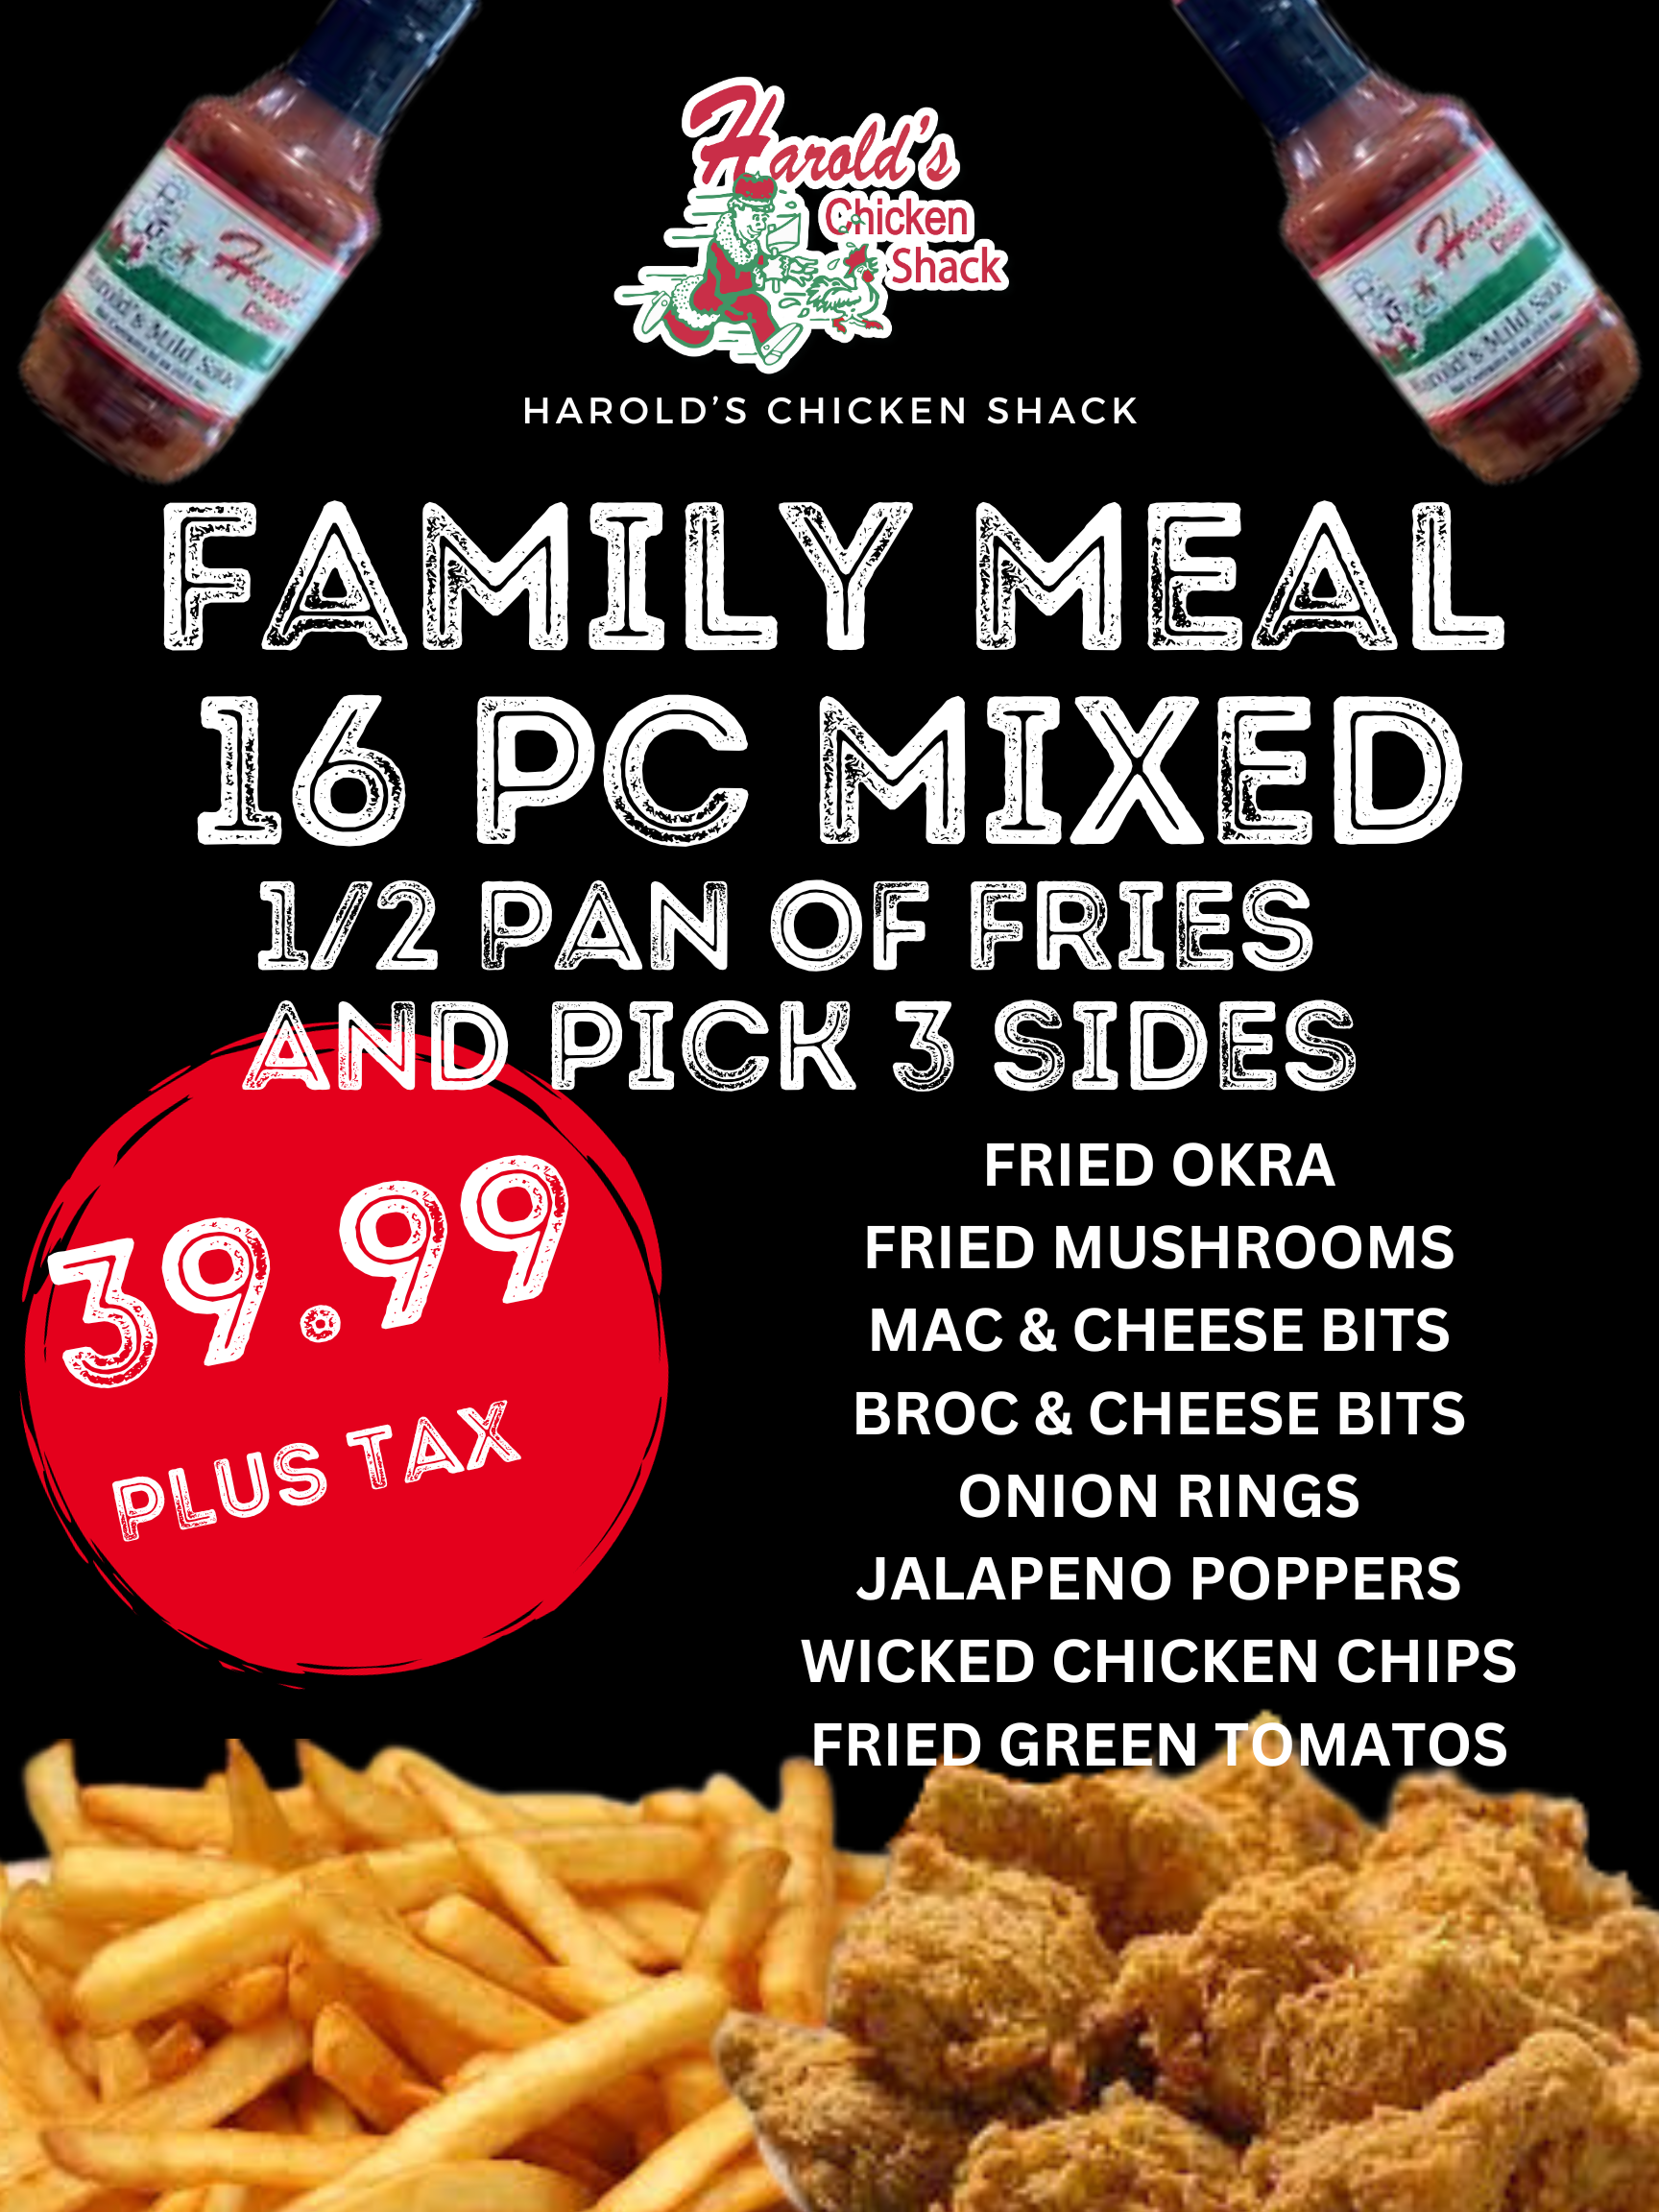 FAMILY MEAL 16 PIECE MIX 1/2 PAN OF FRIES, YOU PICK 3 SIDES